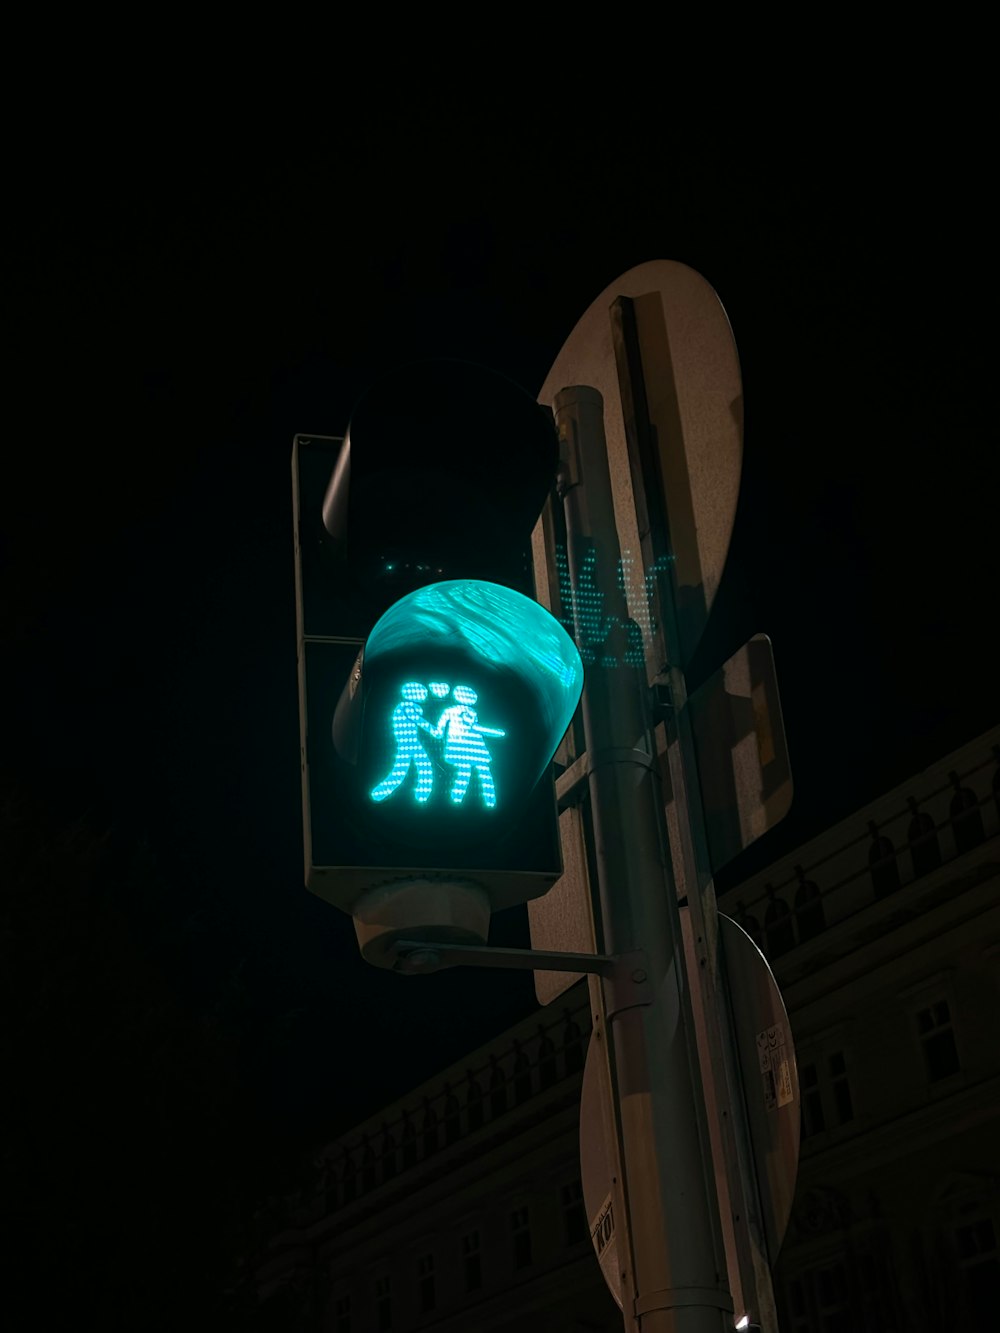 a green traffic light with a picture of two people on it